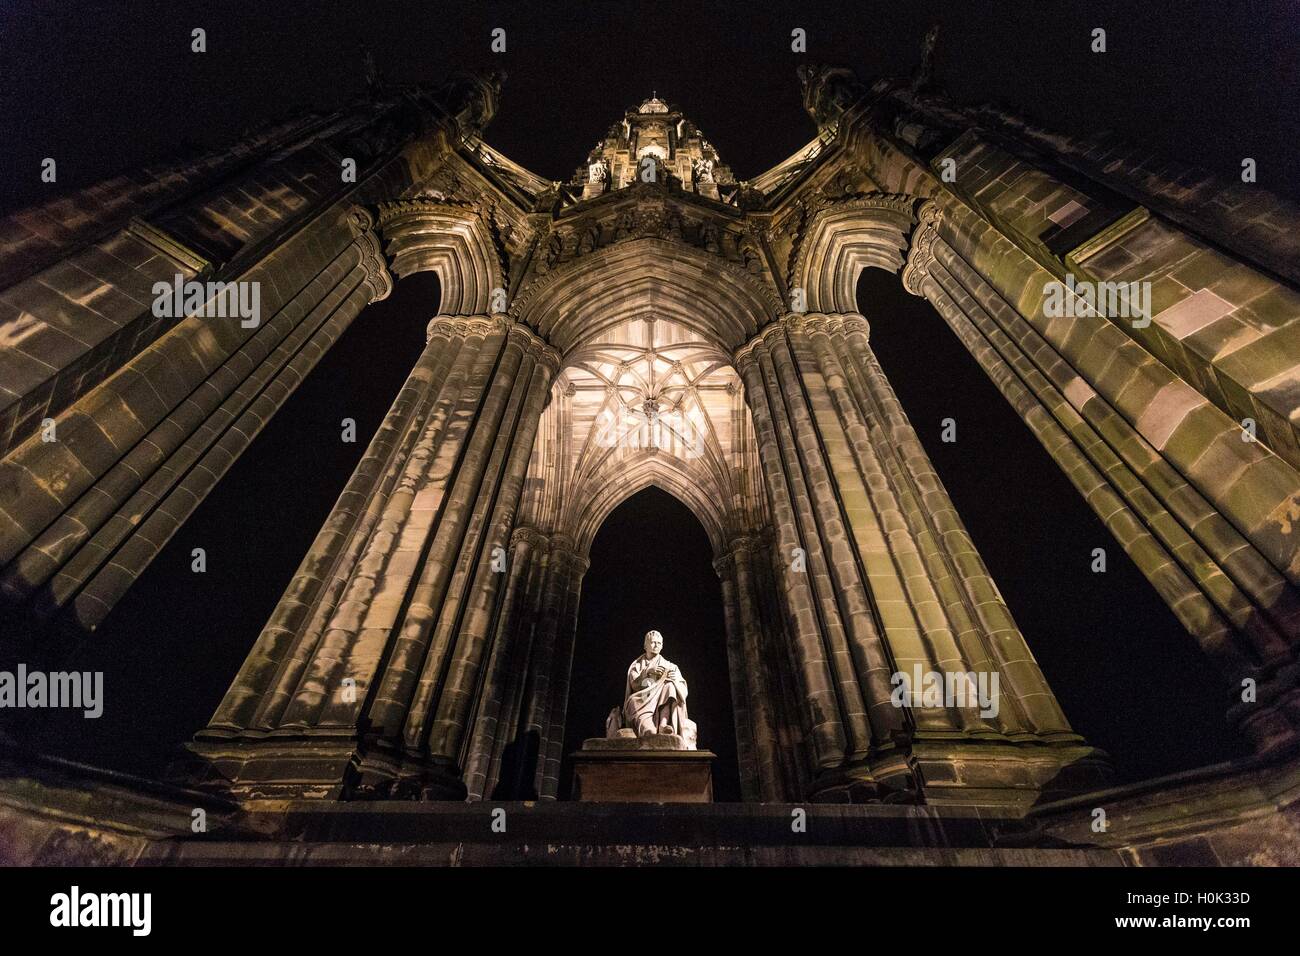 Edinburgh, Scotland, UK. 22nd September, 2016. To commemorate the anniversary of the death of Sir Walter Scott, the famous Scott Monument on Edinburgh's Princes Street has been relit following a refit of the lighting.  The structure has been floodlit in previous years but the new LED system - designed by KSLD - is the first bespoke lighting to be installed. The state-of-the-art design highlights the Monument's intricate architectural features with a soft warm glow, allowing the landmark to shine as part of Edinburgh's night skyline. Credit:  Richard Dyson/Alamy Live News Stock Photo